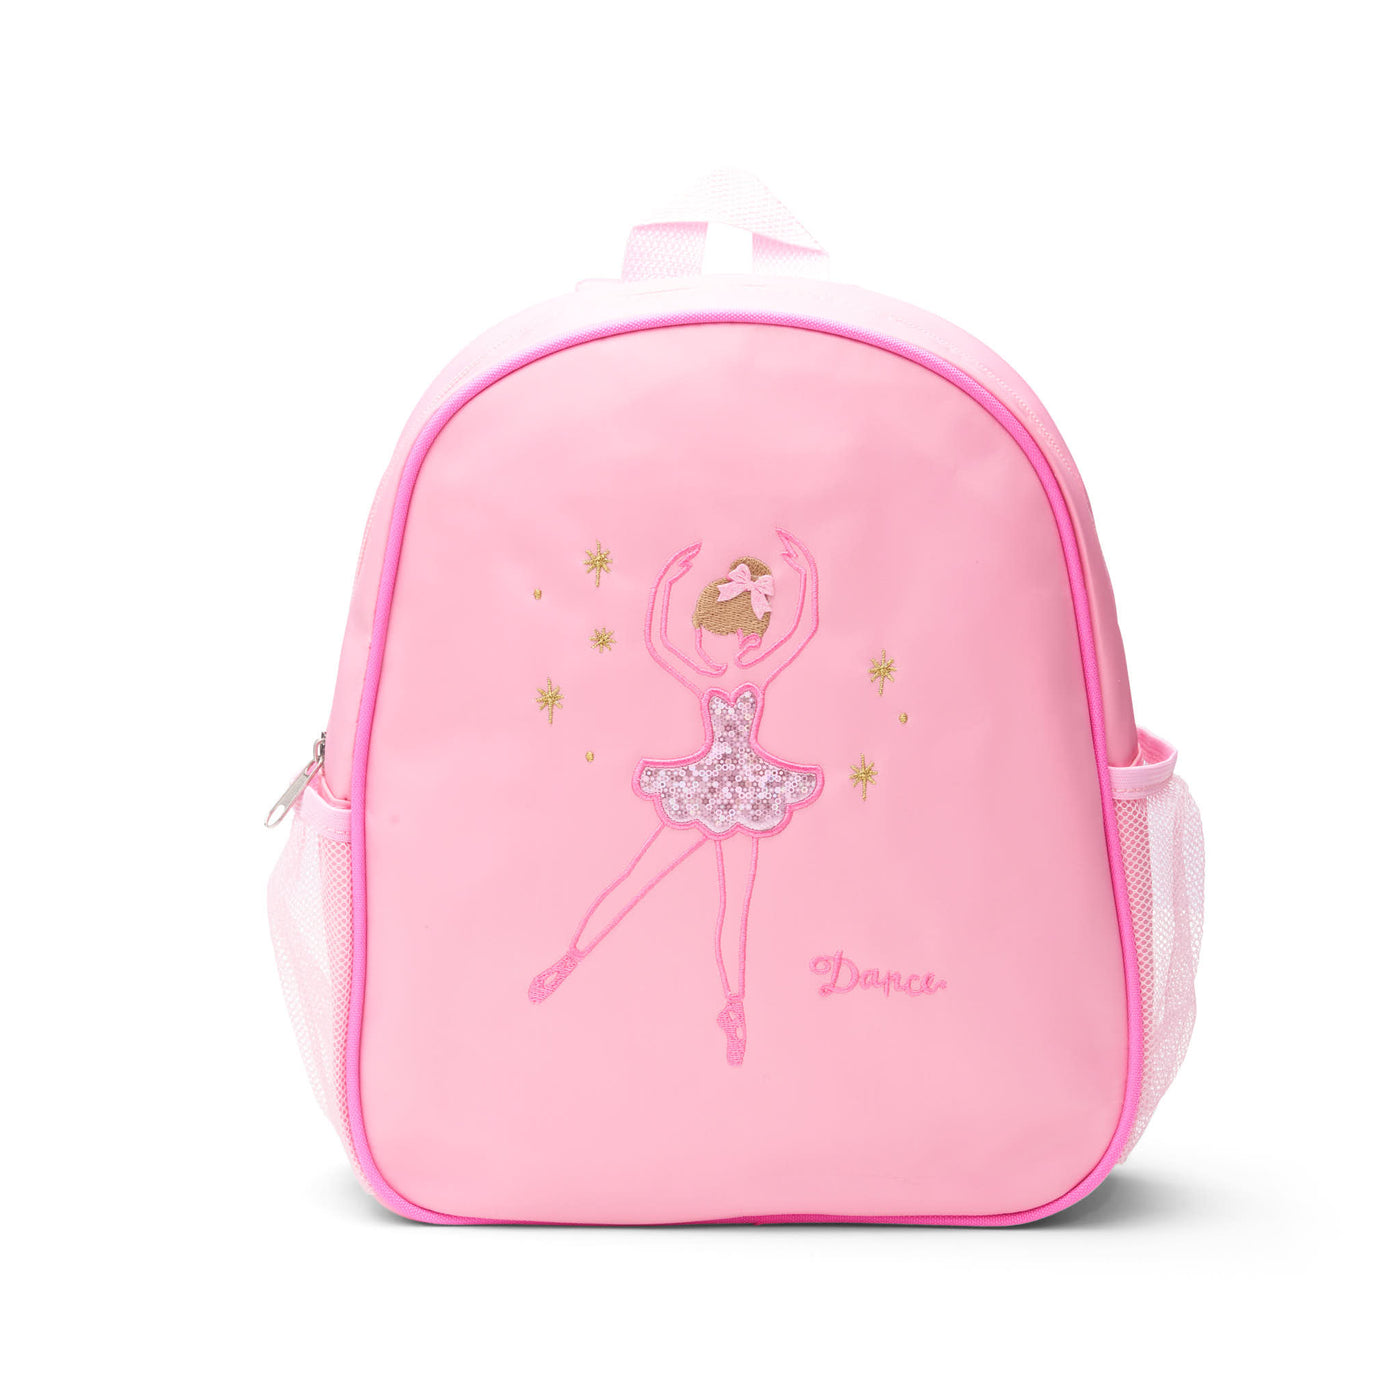 Girls Dance Backpack Toddler 3-8 Years Pink